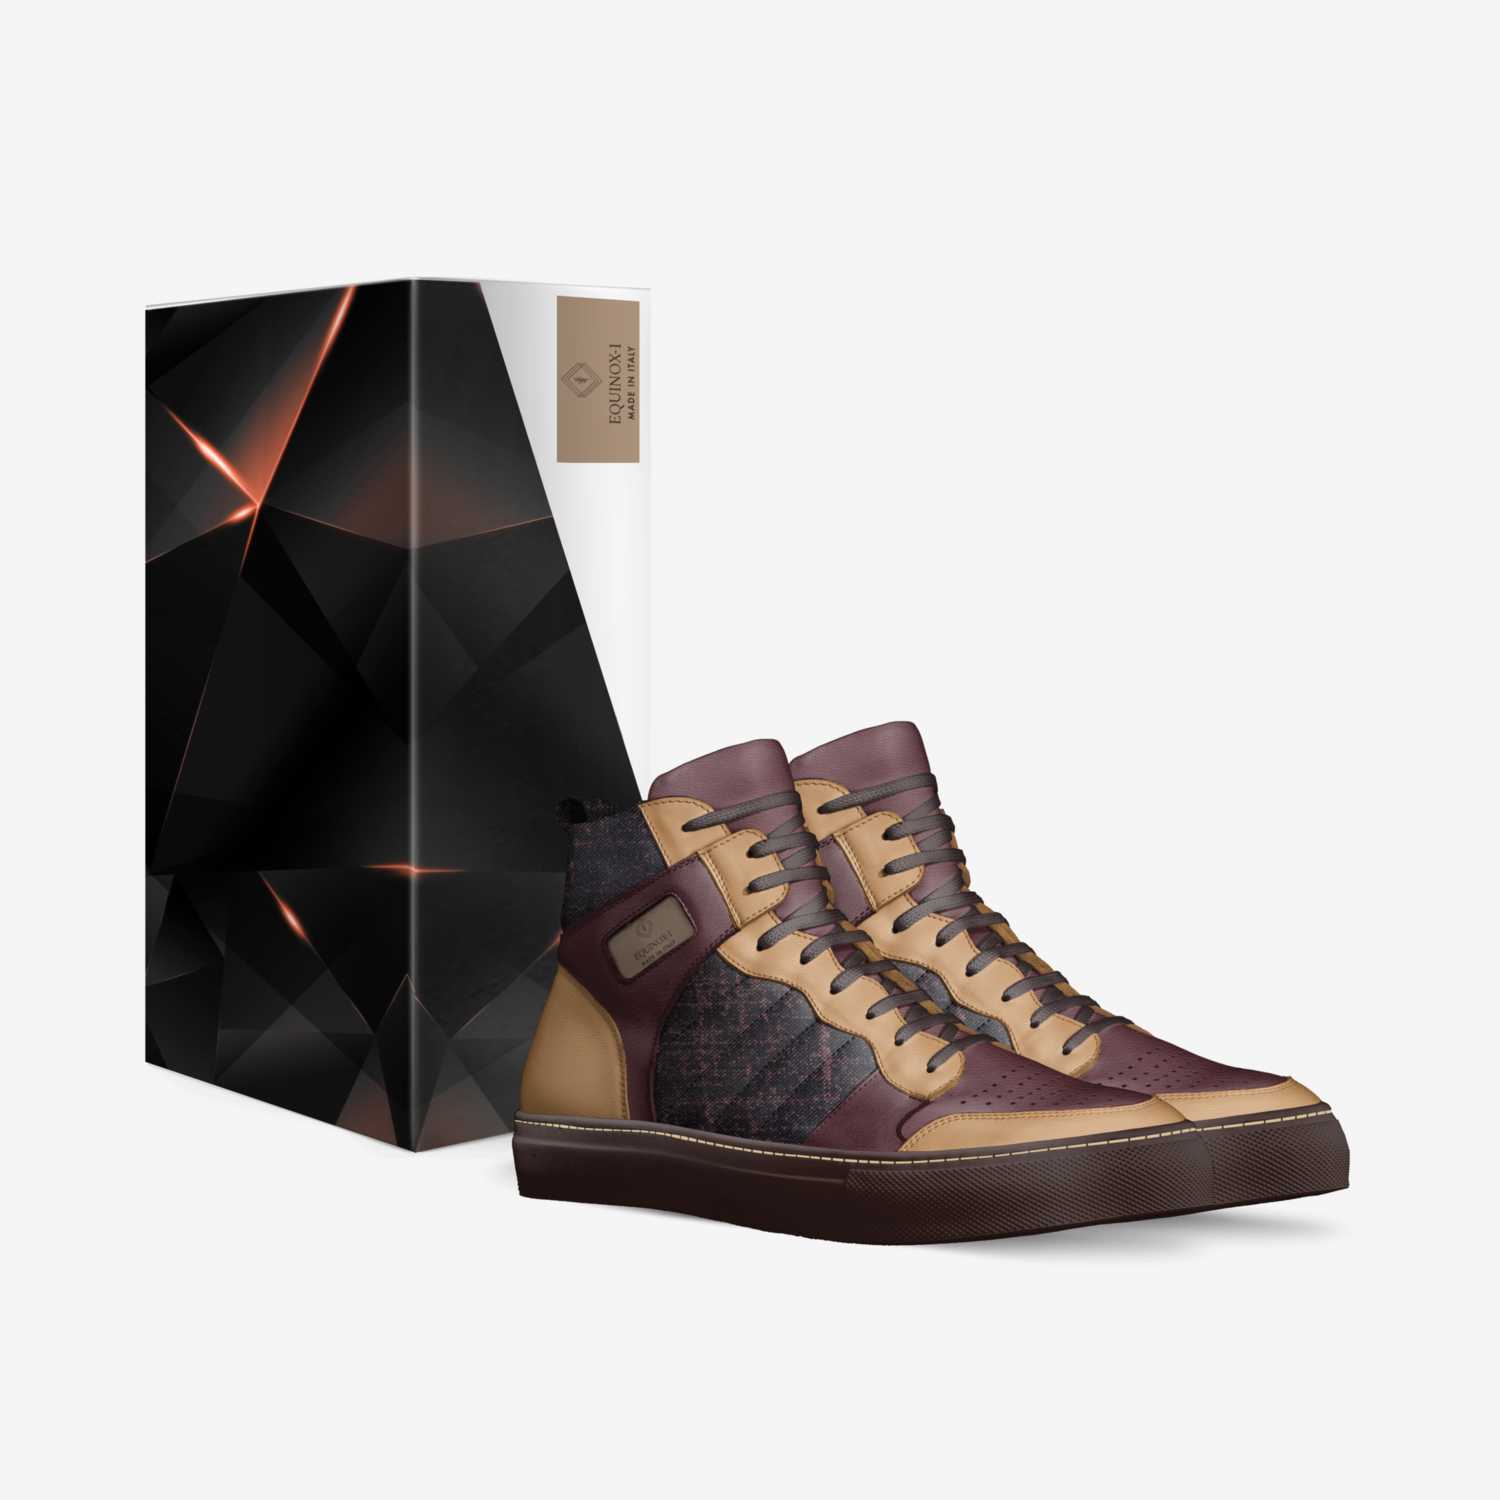 Equinox-1  custom made in Italy shoes by Ethan Standridge | Box view